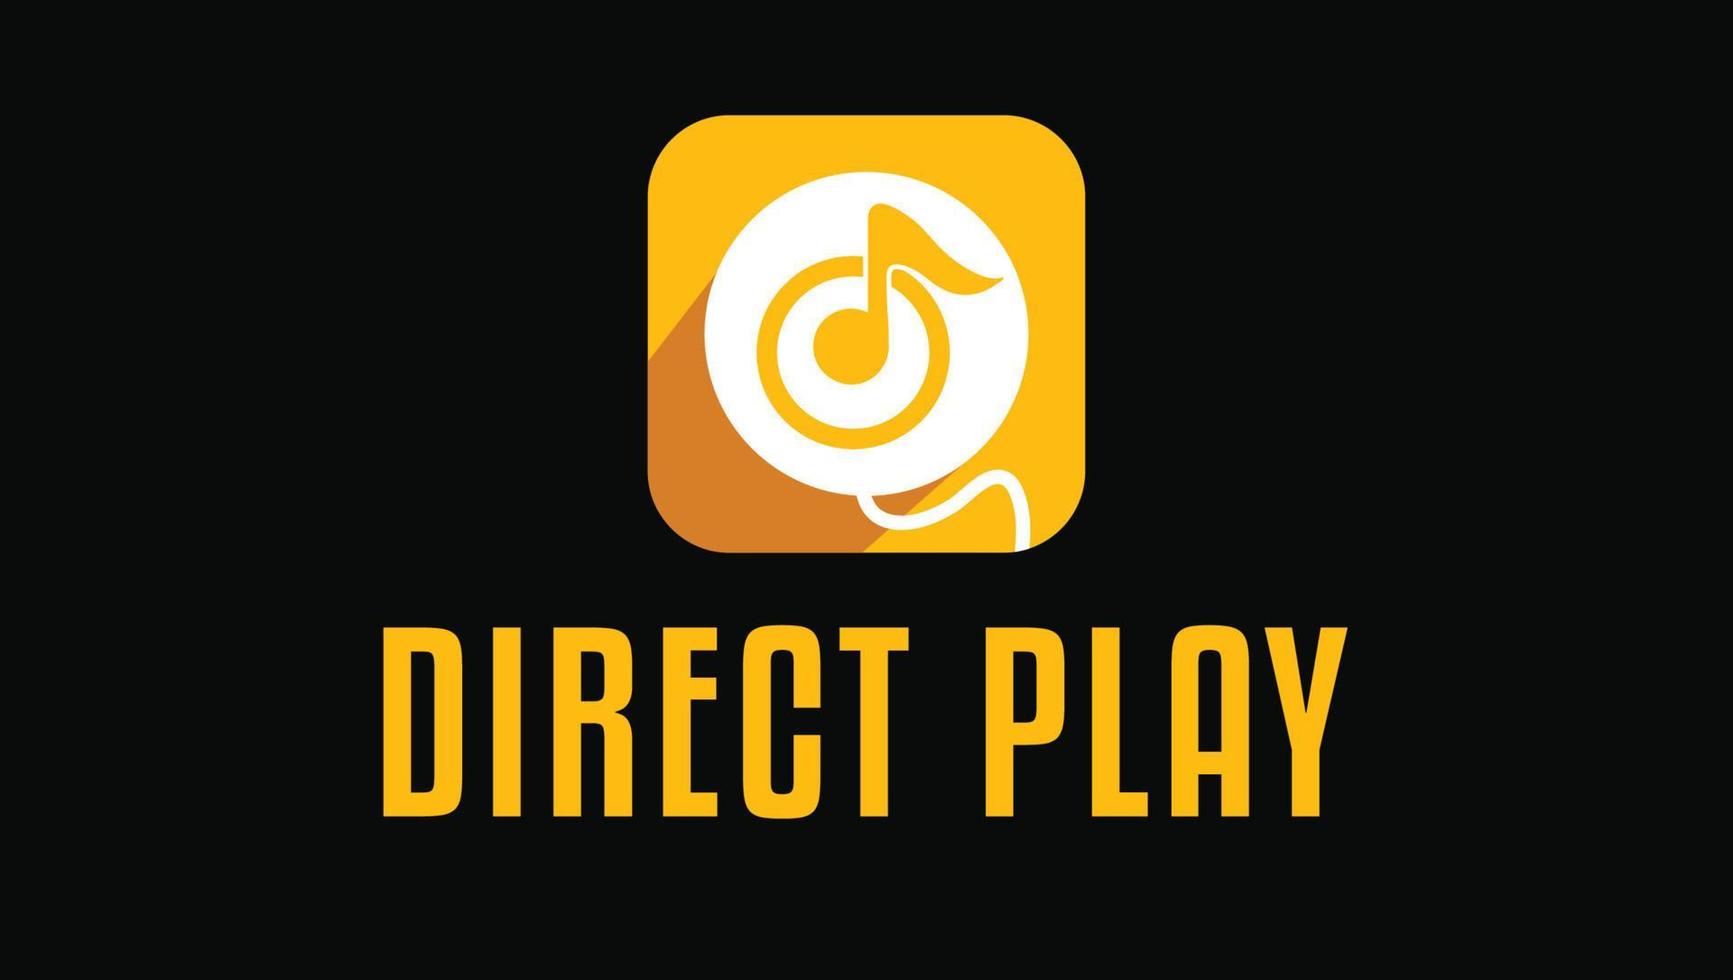 Direct play media production video making logo design vector